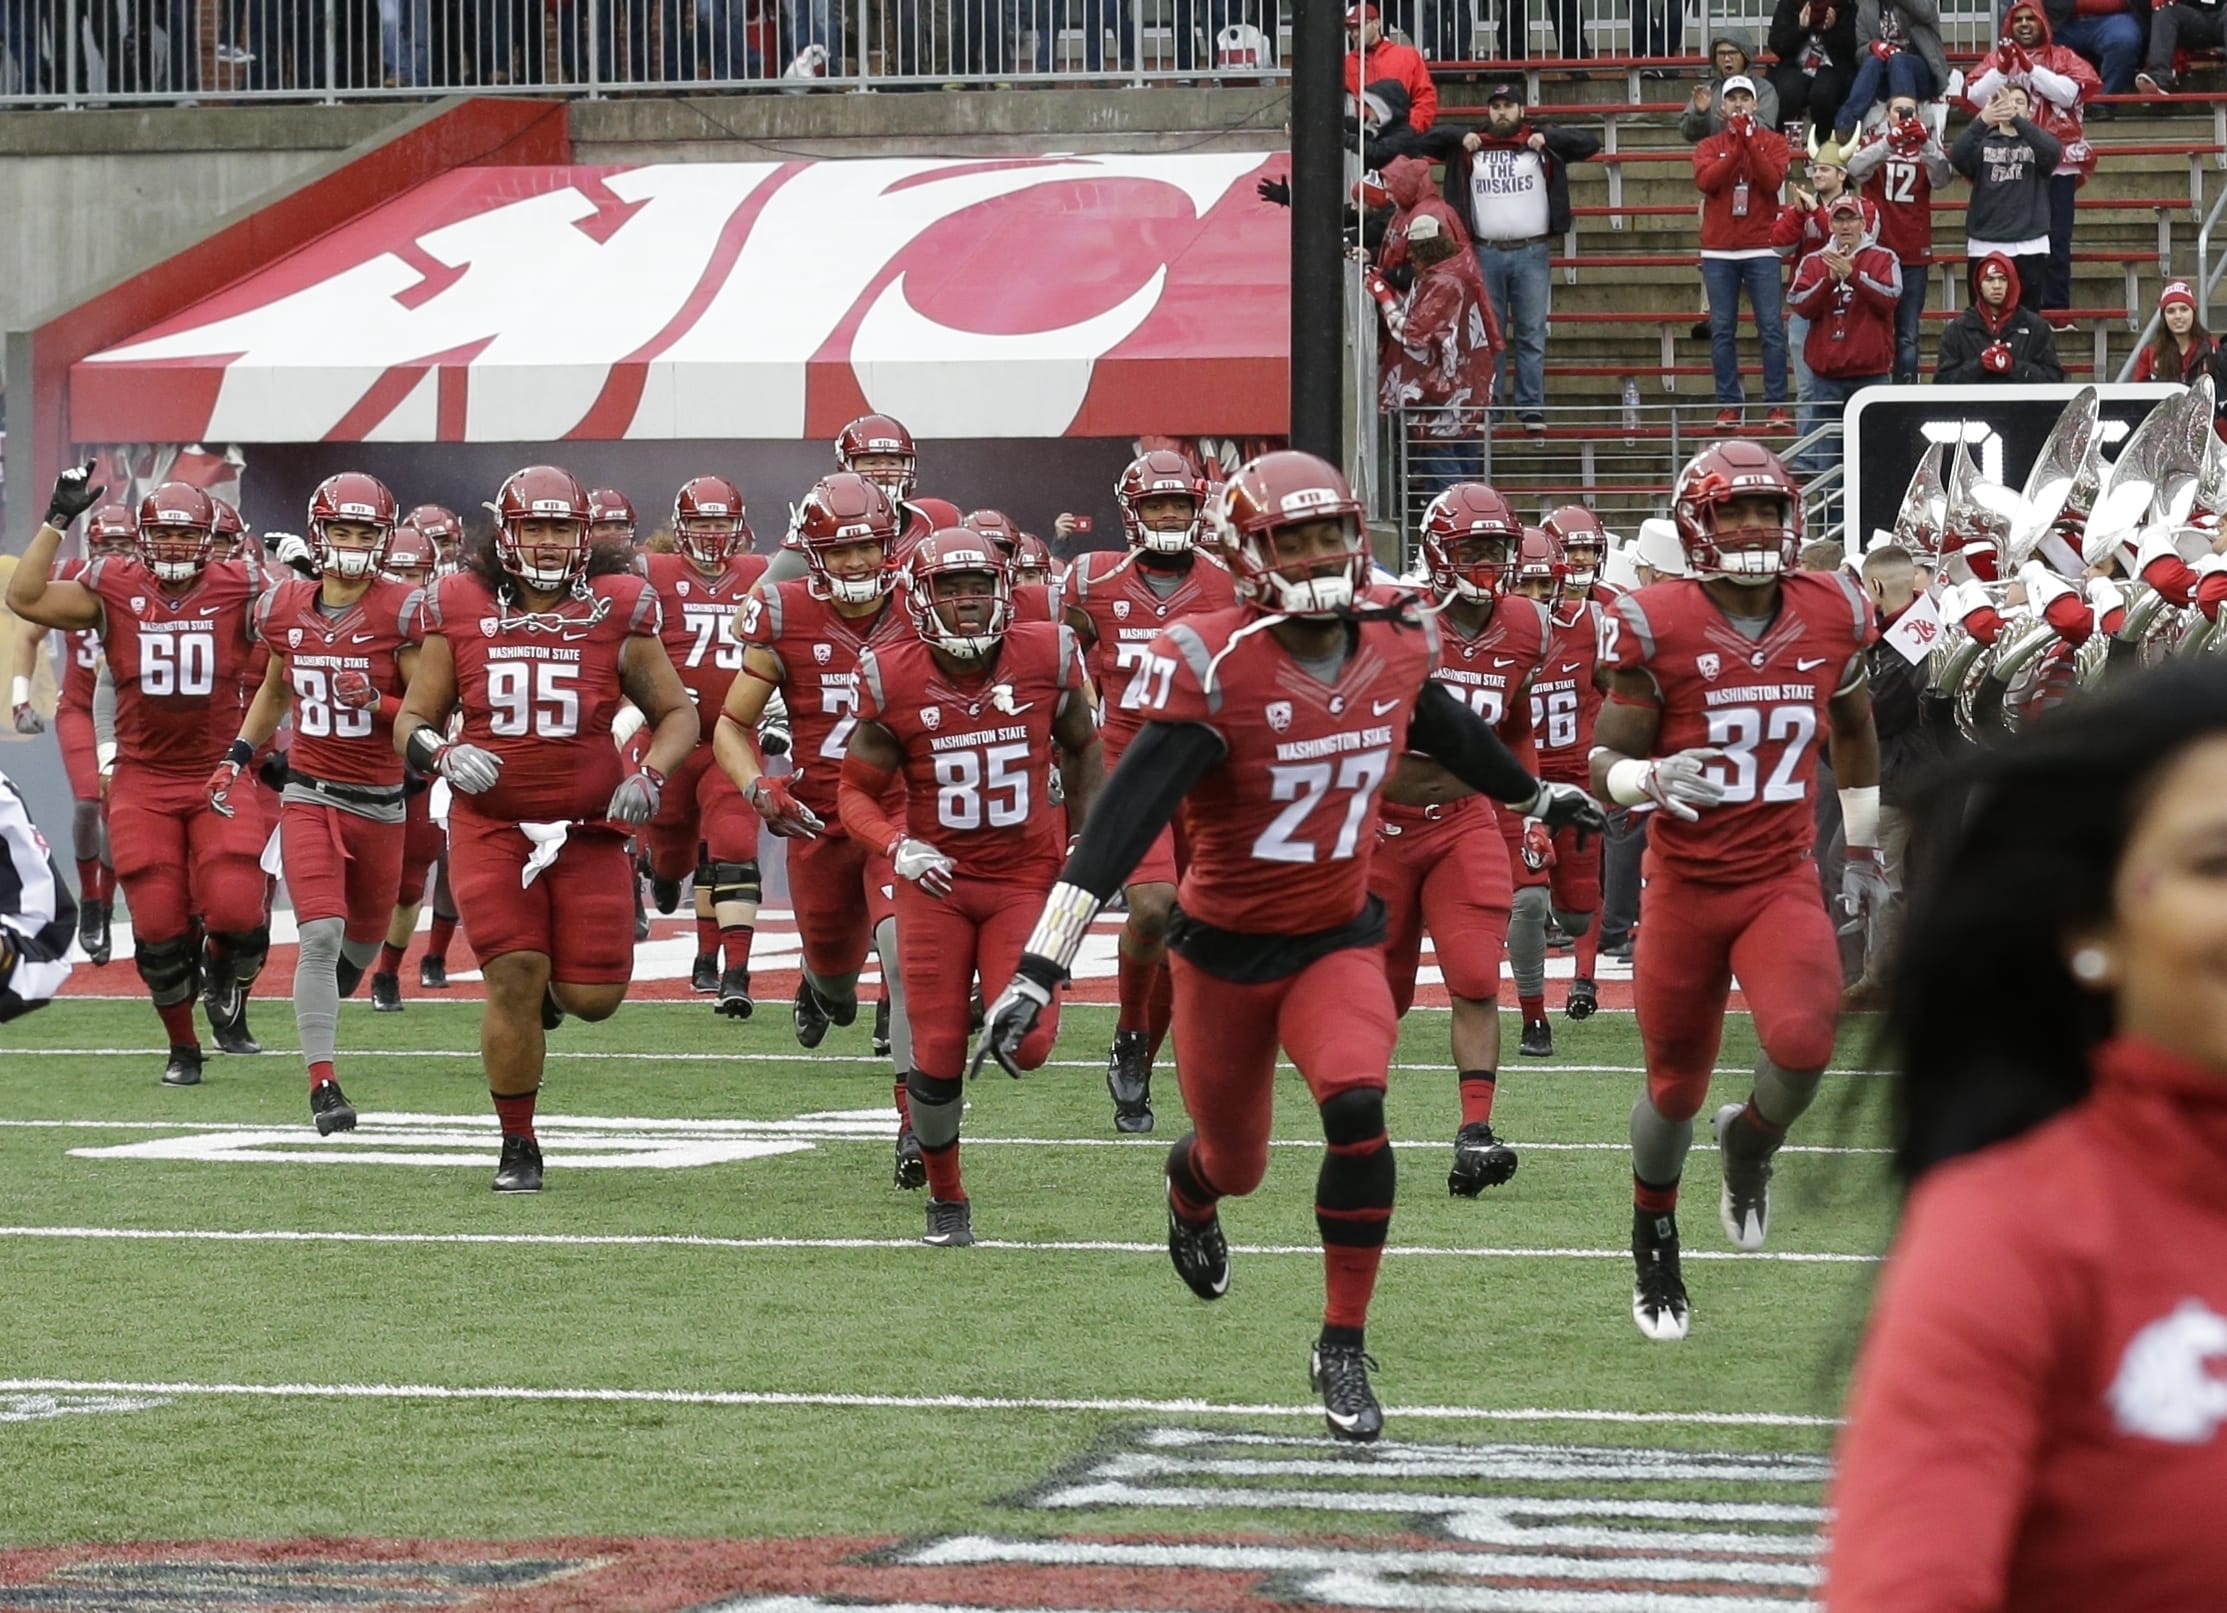 Washington State players run onto the field before an NCAA college football game against Washington, Friday, Nov. 25, 2016, in Pullman, Wash. (AP Photo/Ted S.